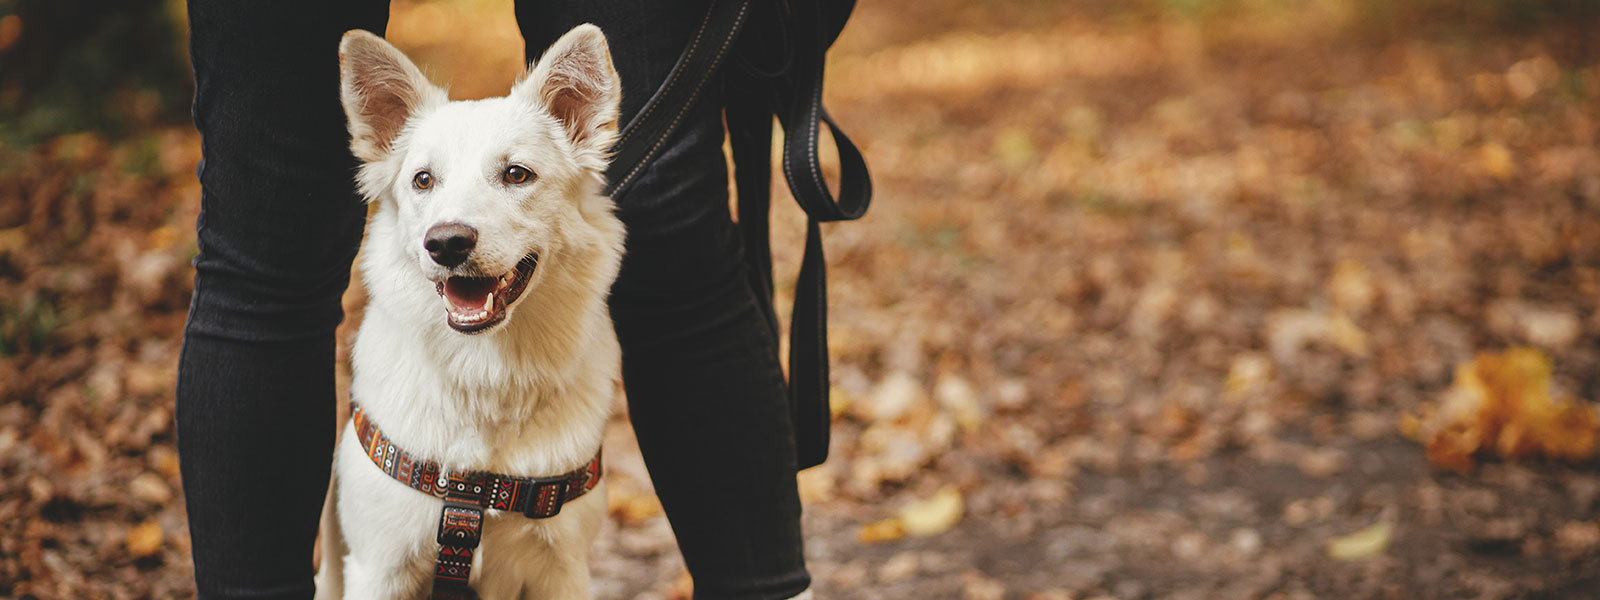 Everything You Should Know About Hiking With Your Pup